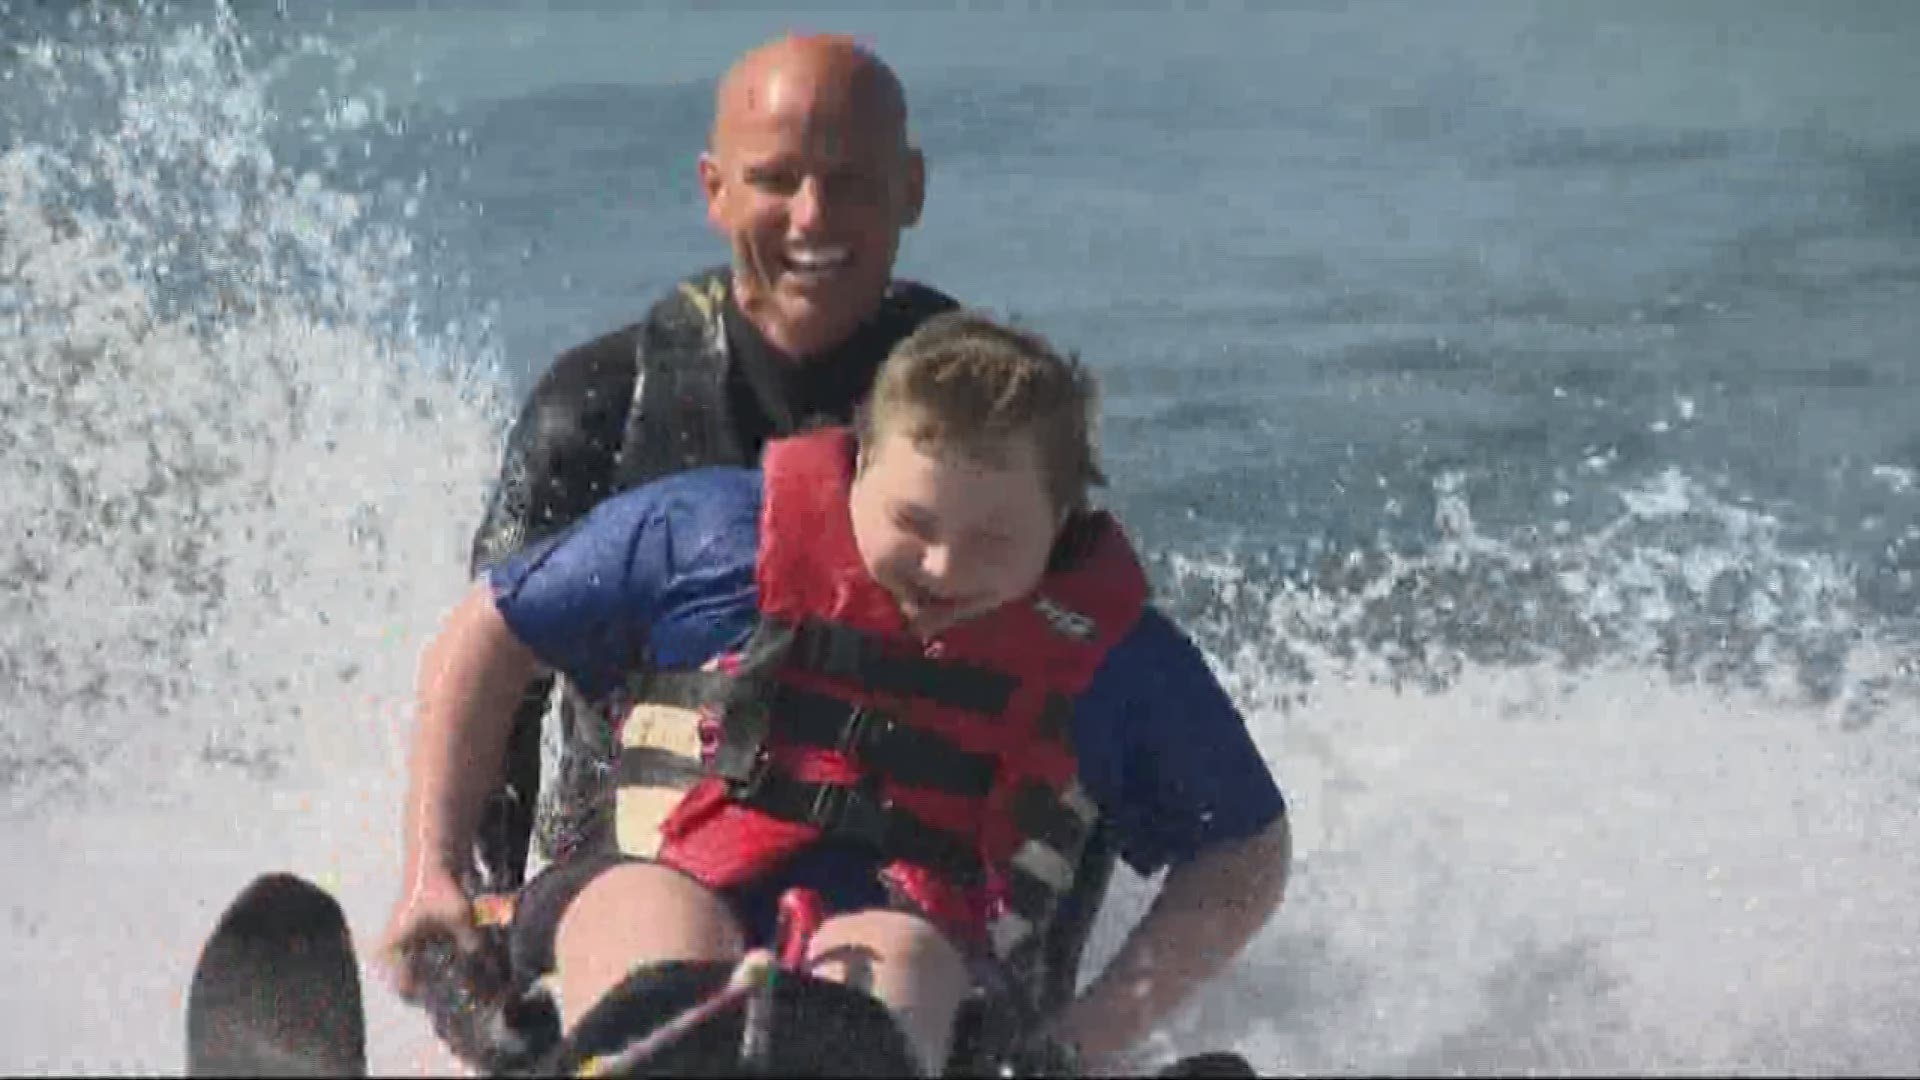 Adults with disabilities were able to experience water sports that most of us take for granted. The event was put on by "Imagine Possibilities."